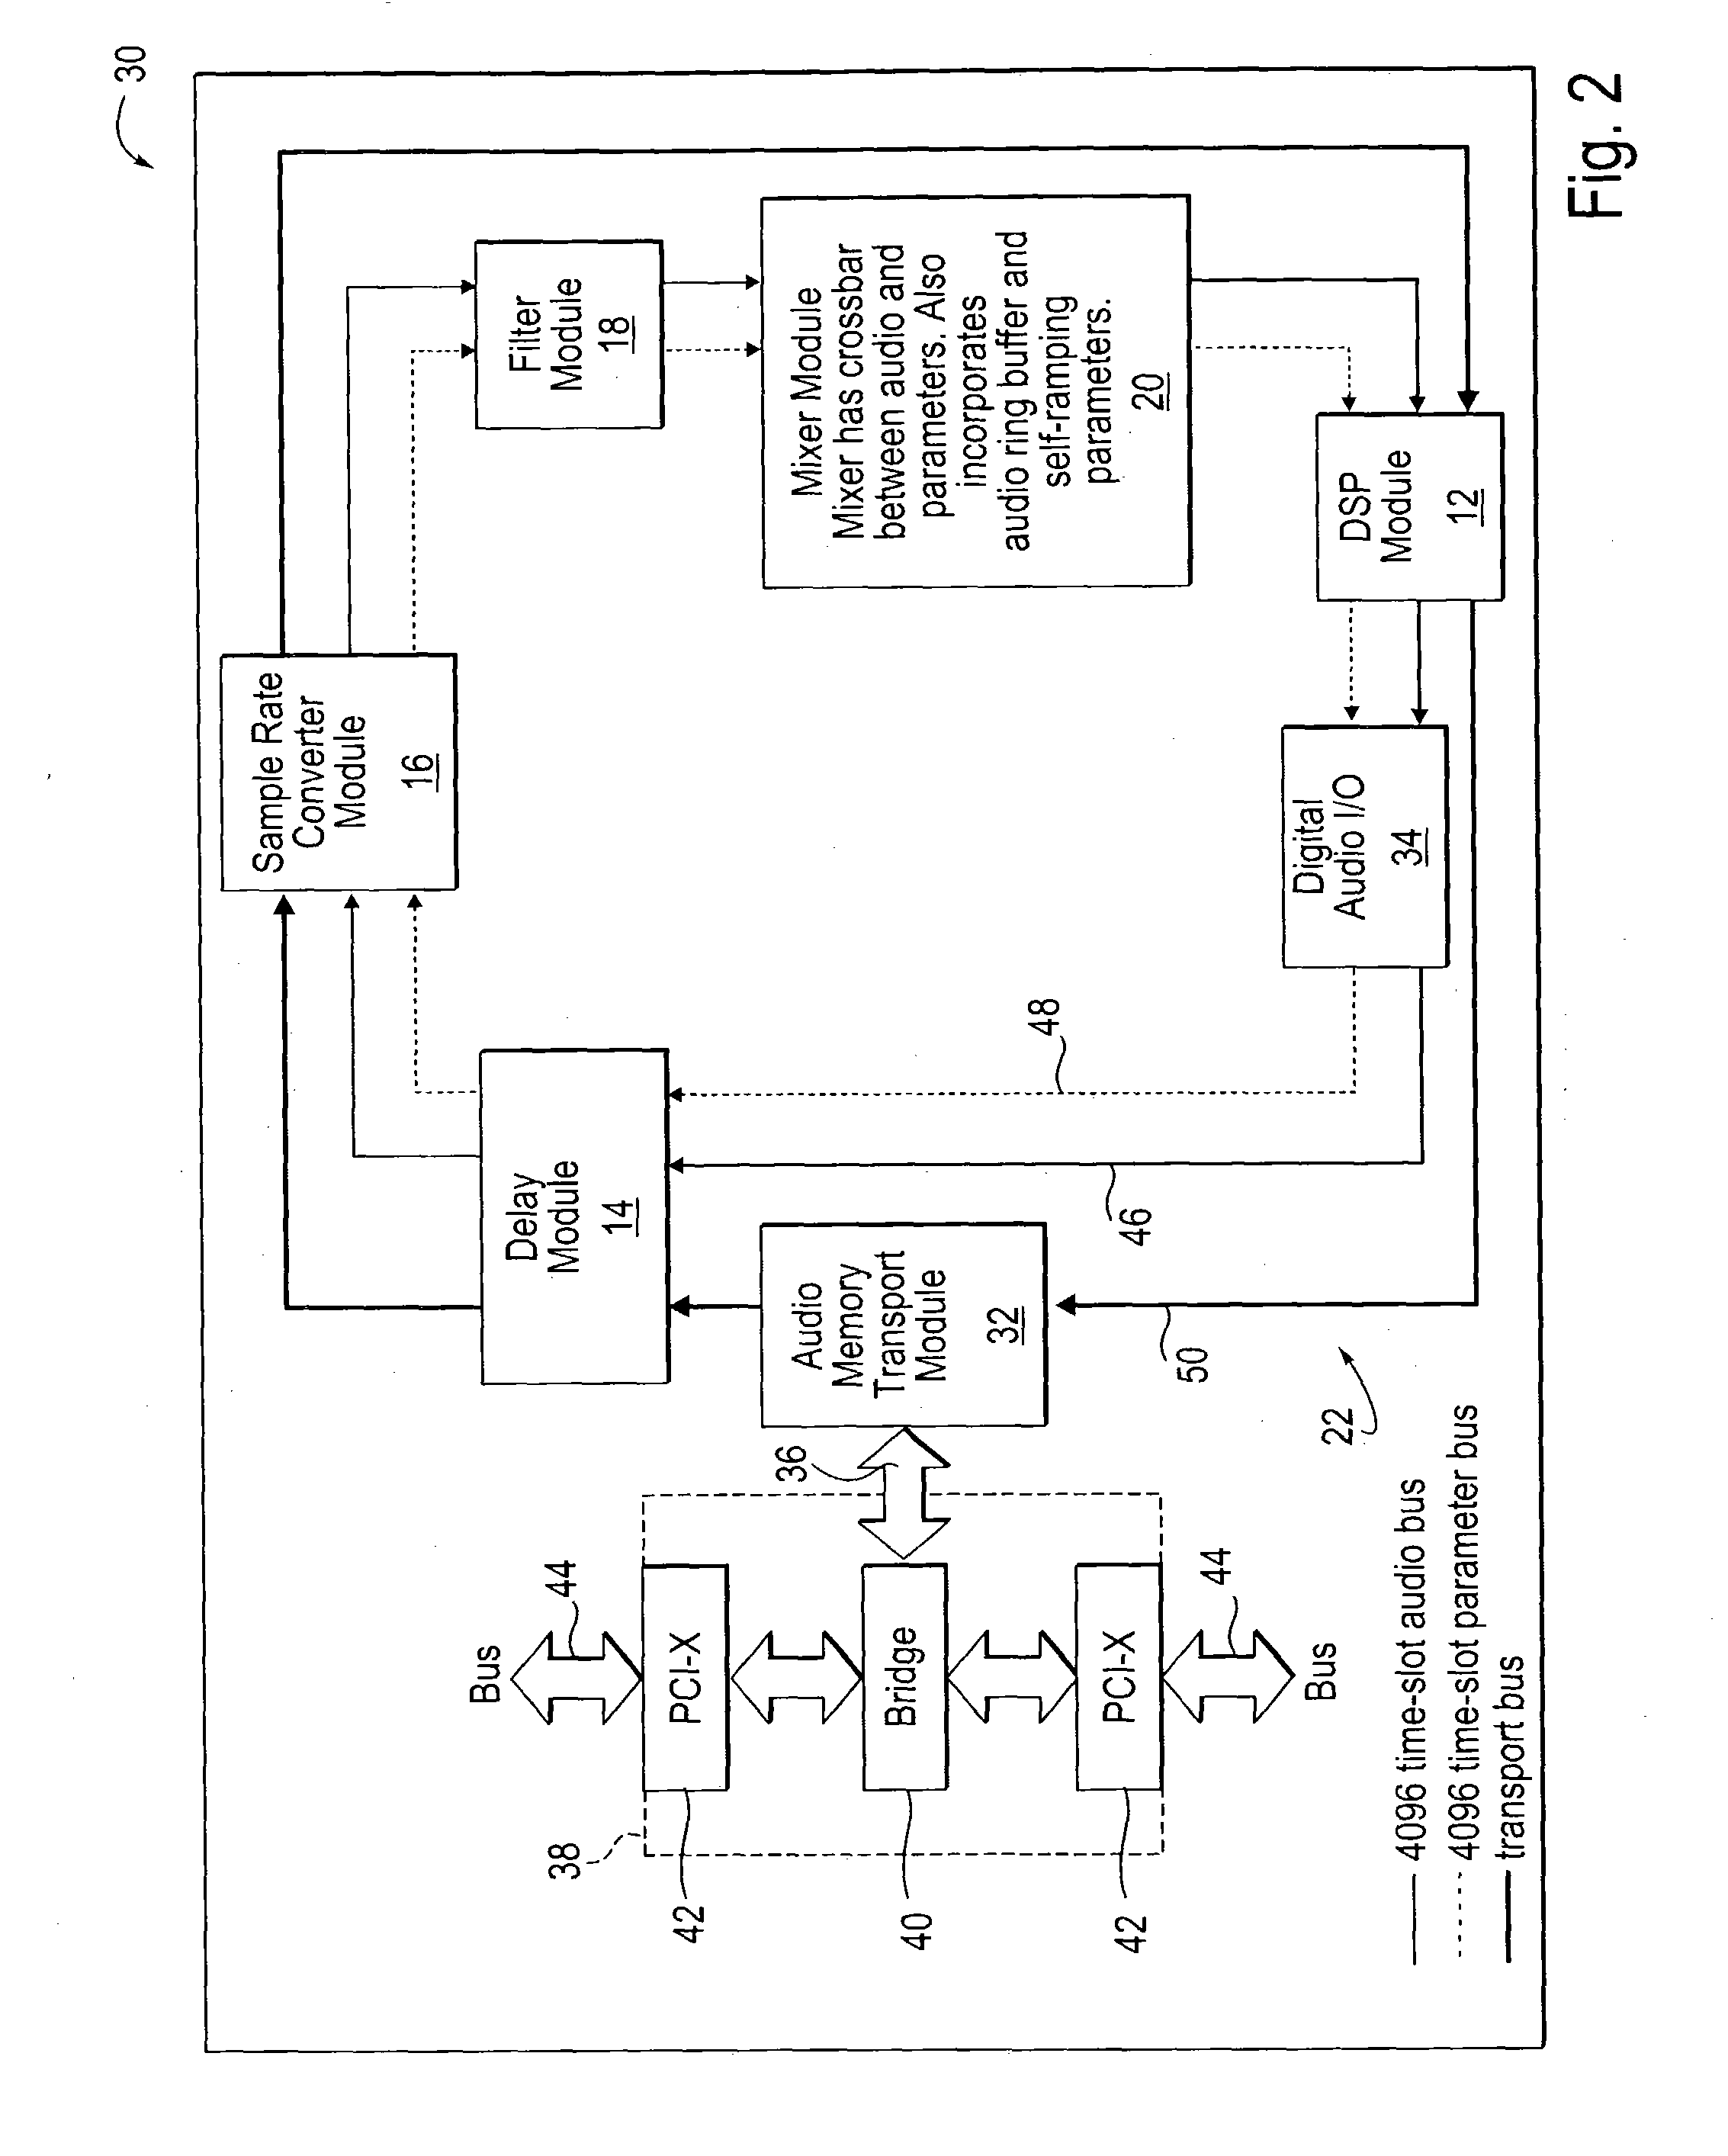 Method and device to process digital media streams